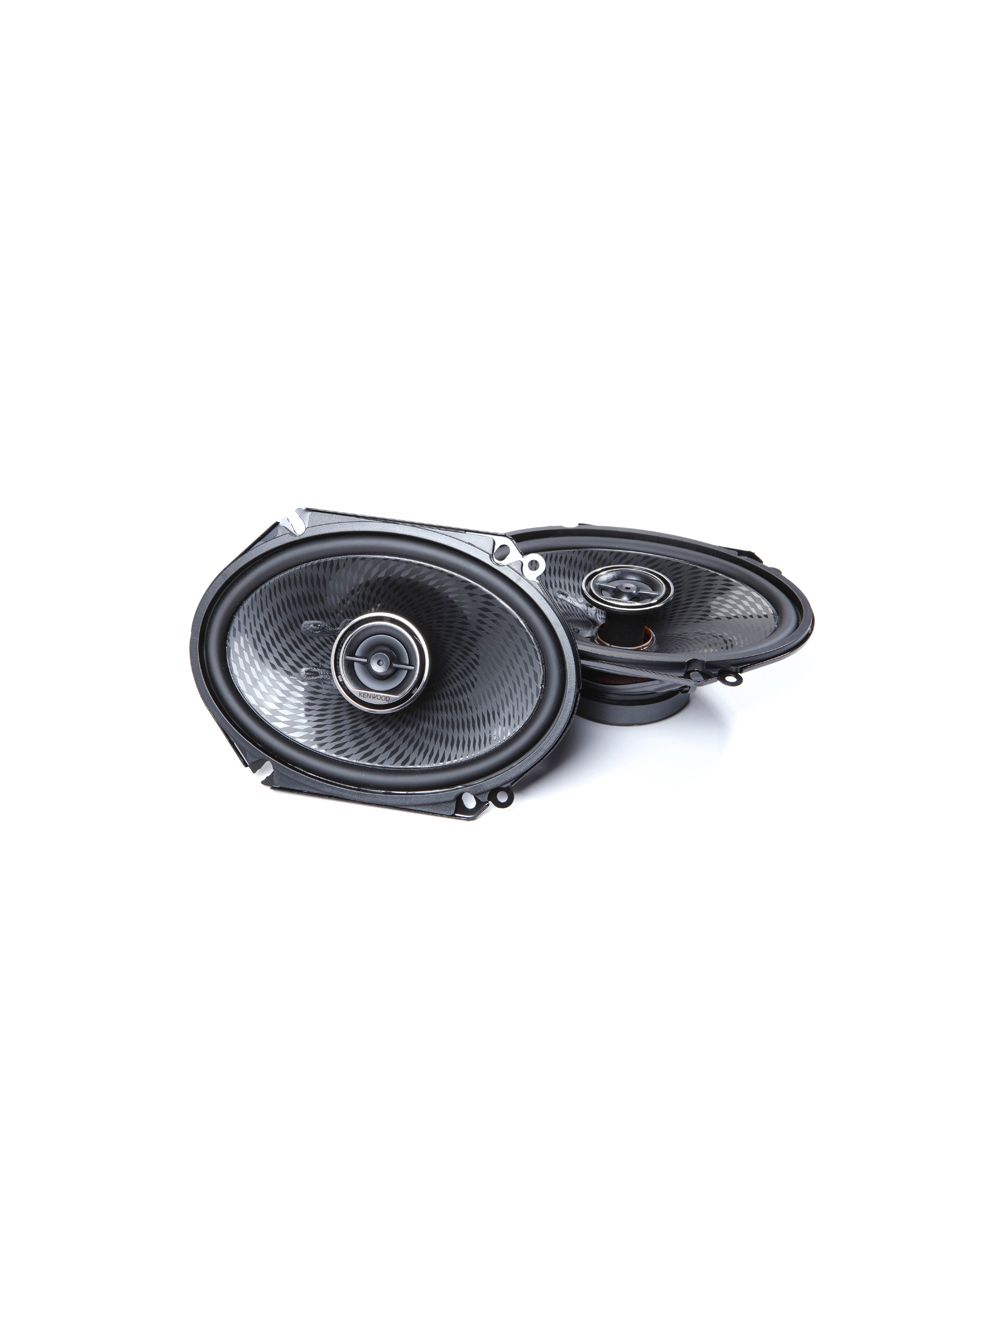 Car Speaker Size Replacement fits 2004-2009 for Mazda Mazda3 (not amplified)